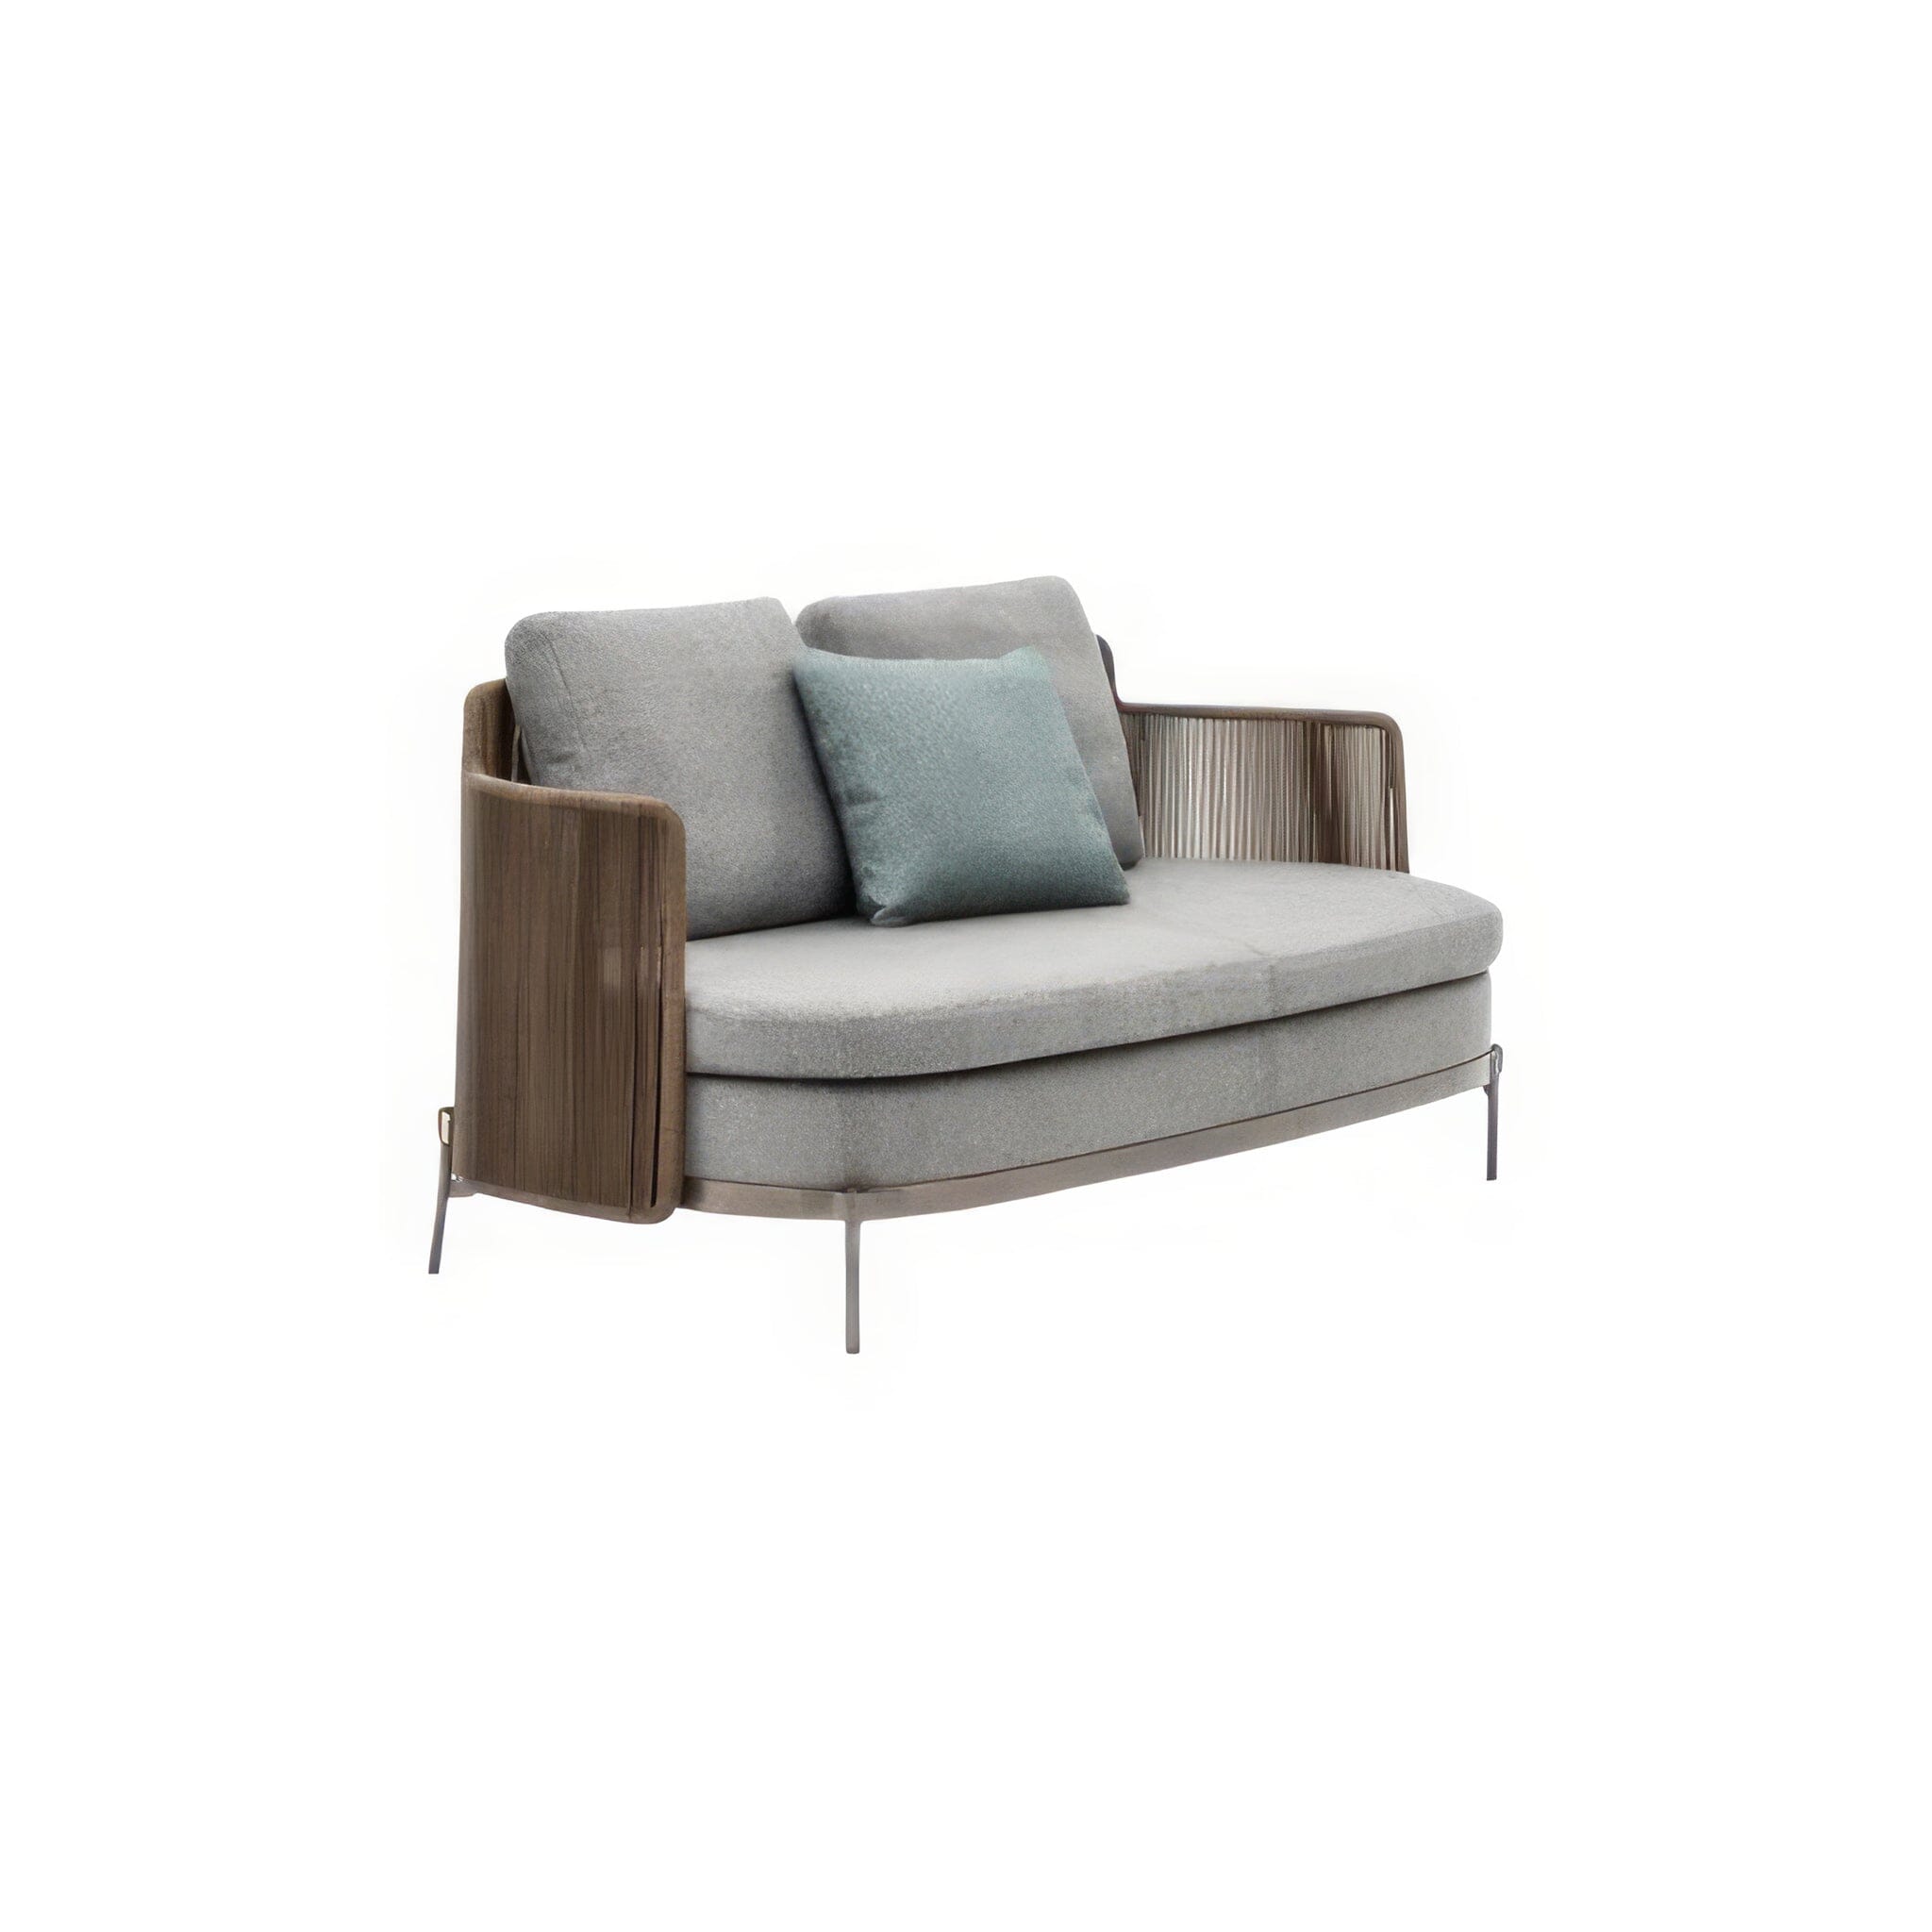 Lorraine Outdoor Collection (needs images) Sofa 